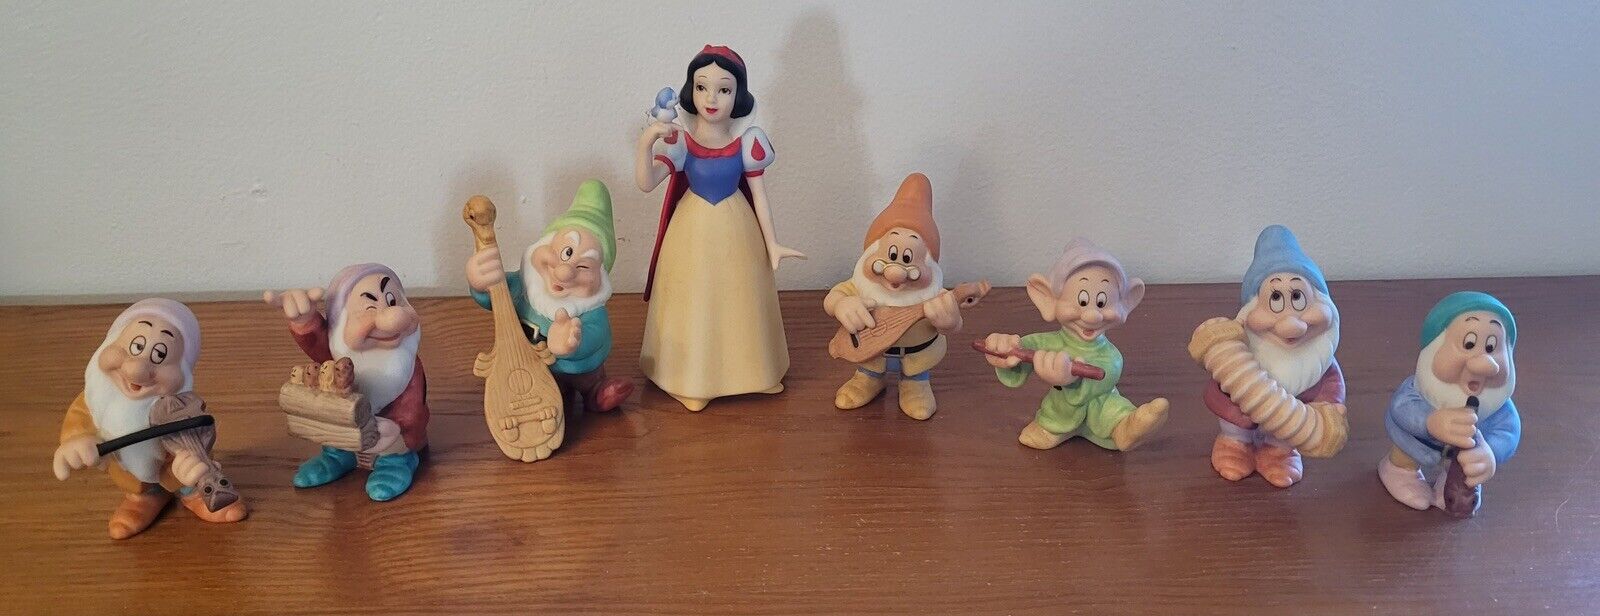 Snow White and the Seven Dwarves ceramic figurines